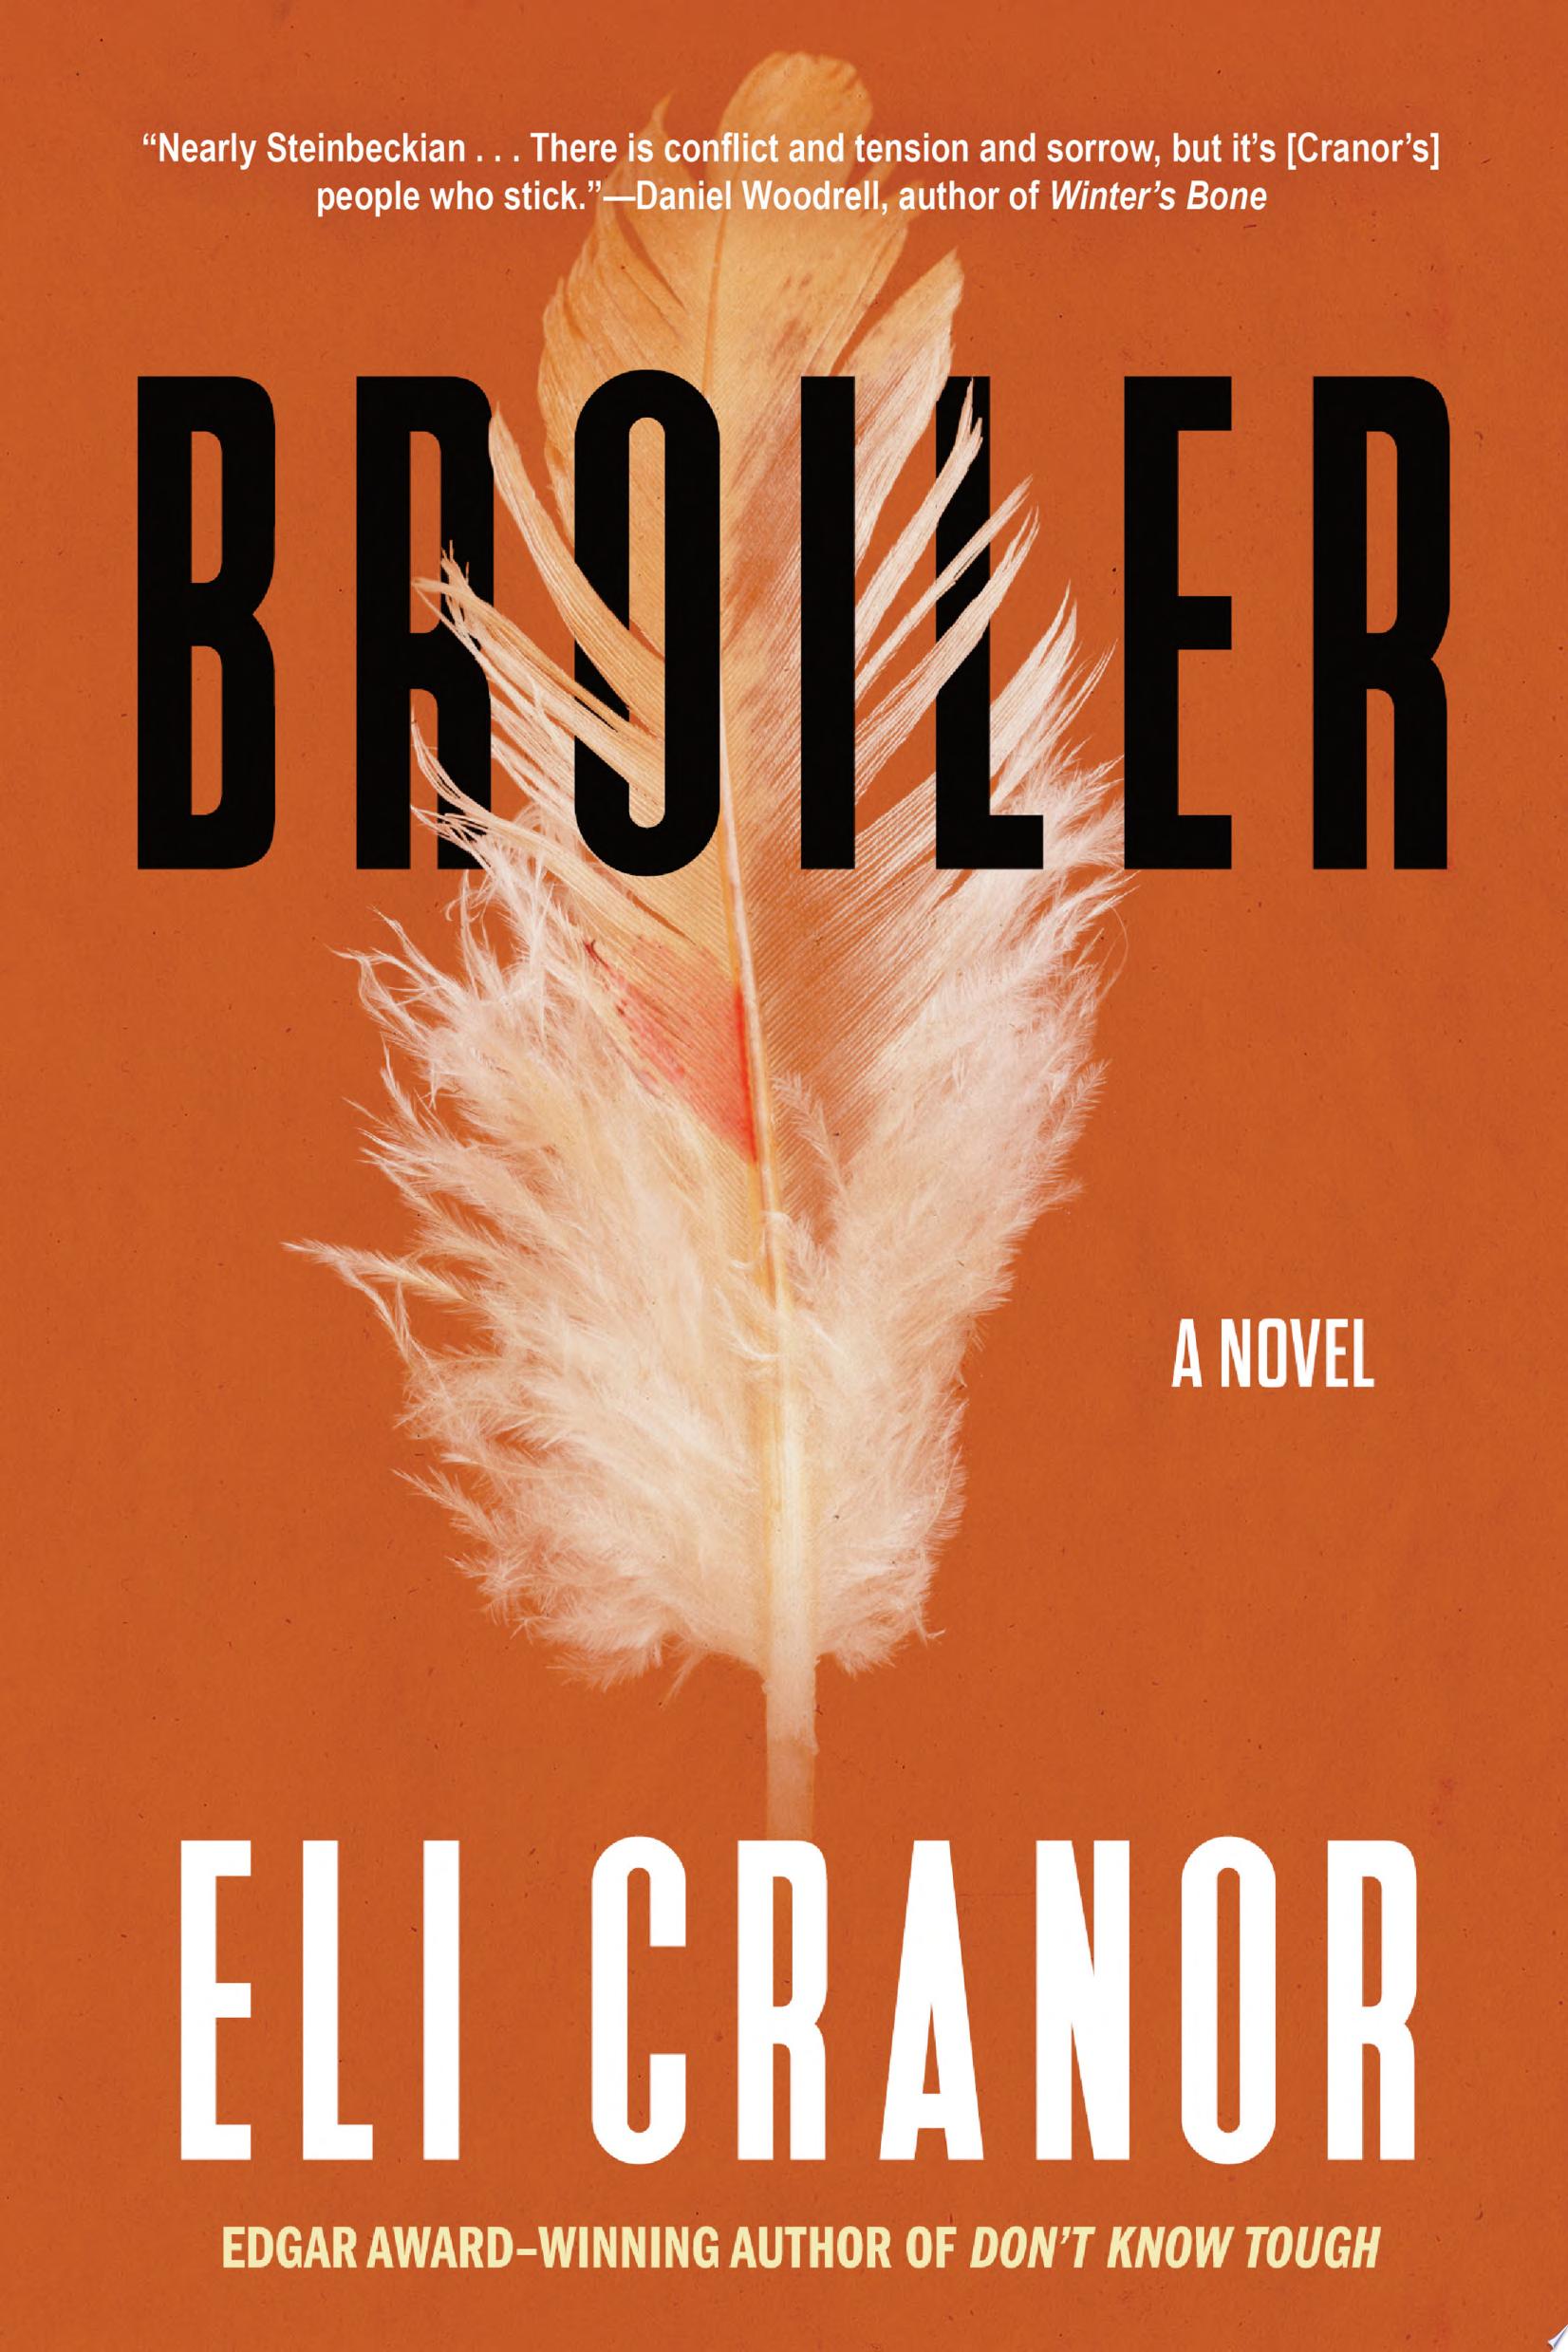 Image for "Broiler"